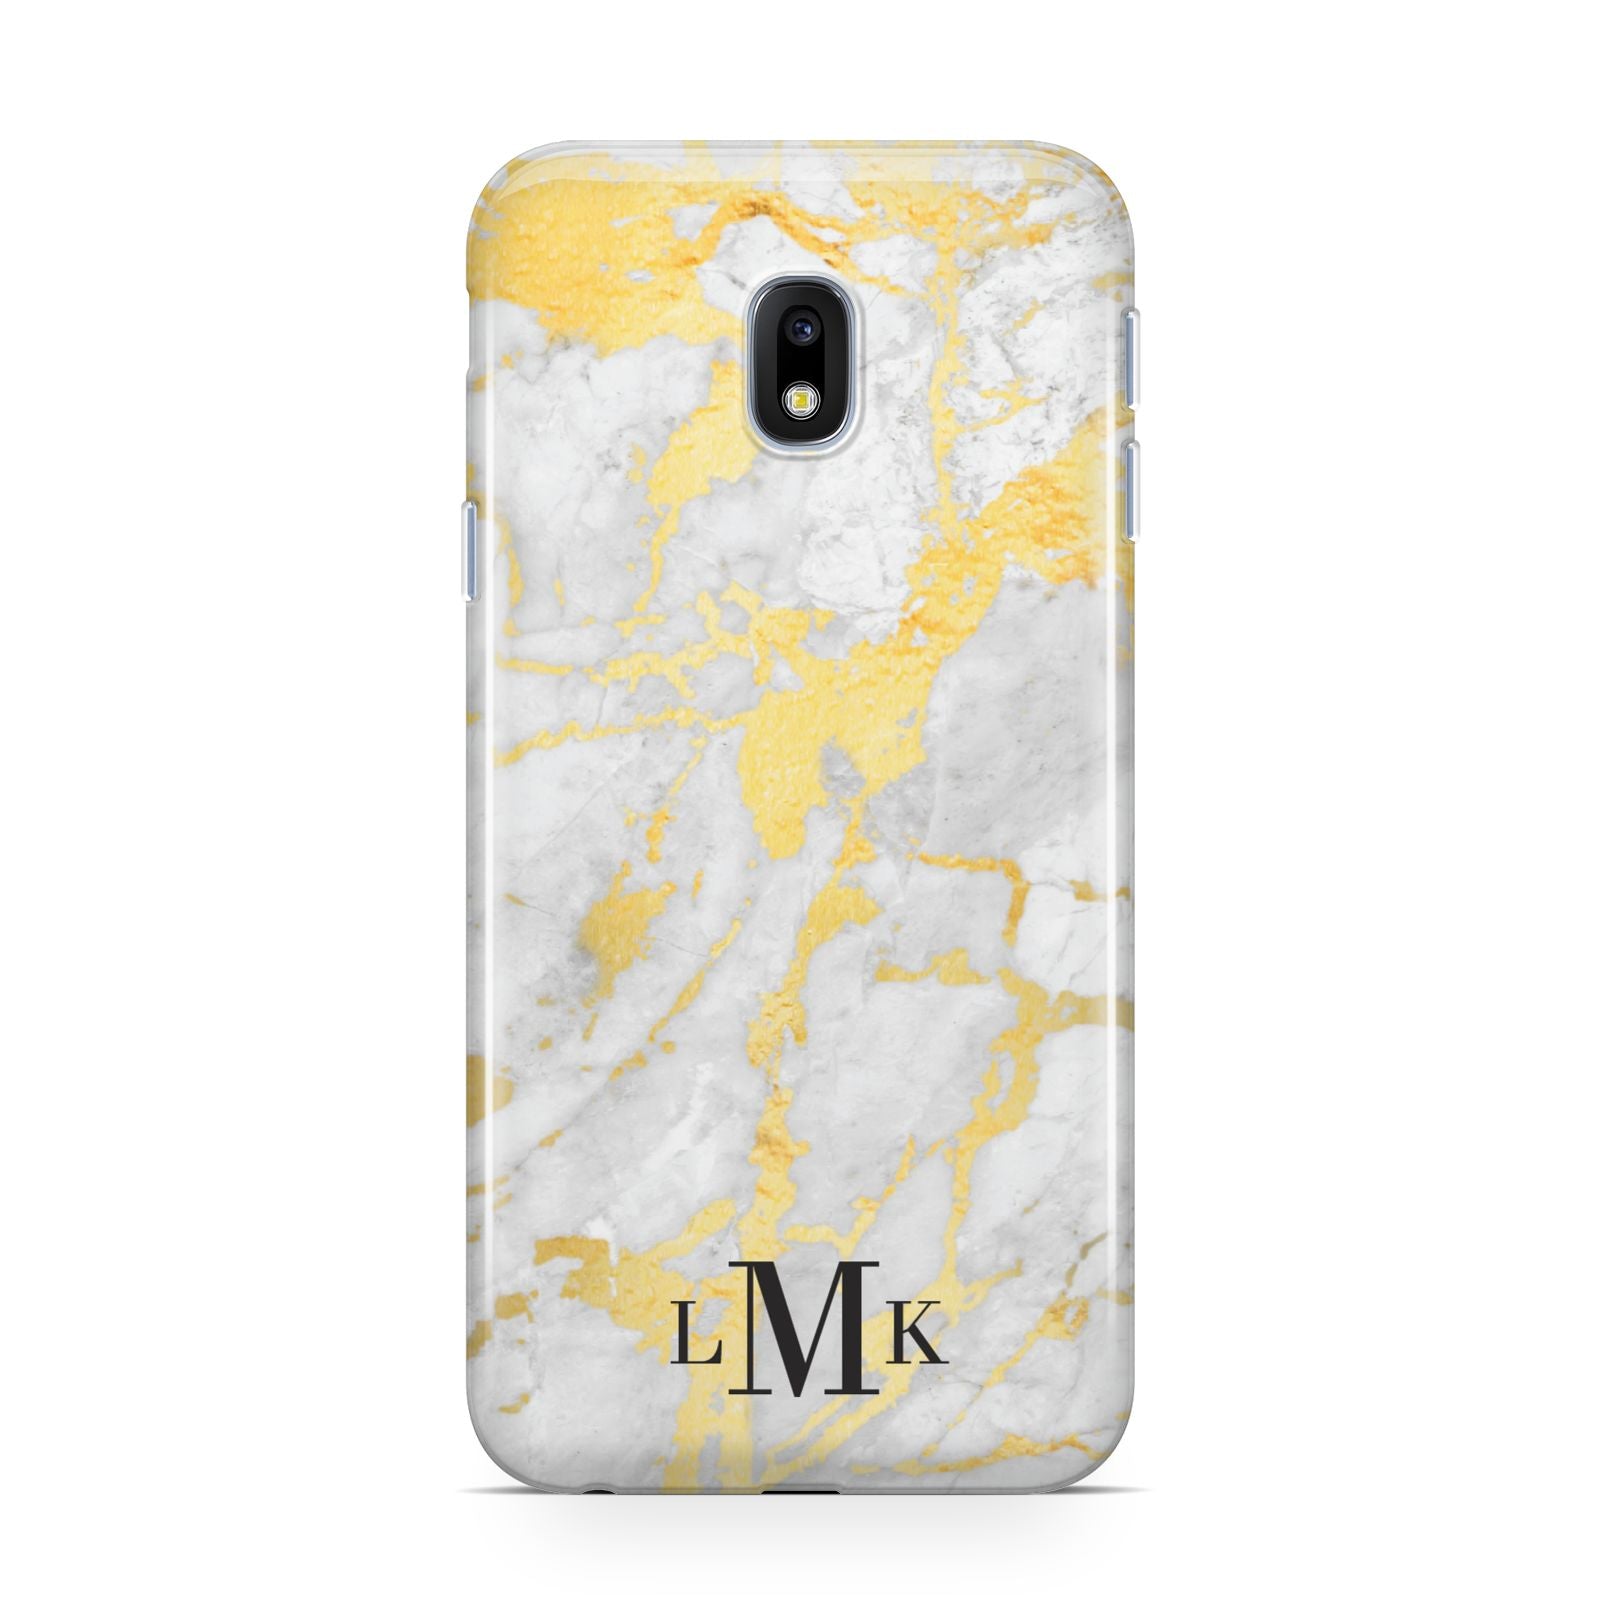 Gold Marble Initials Customised Samsung Galaxy J3 2017 Case